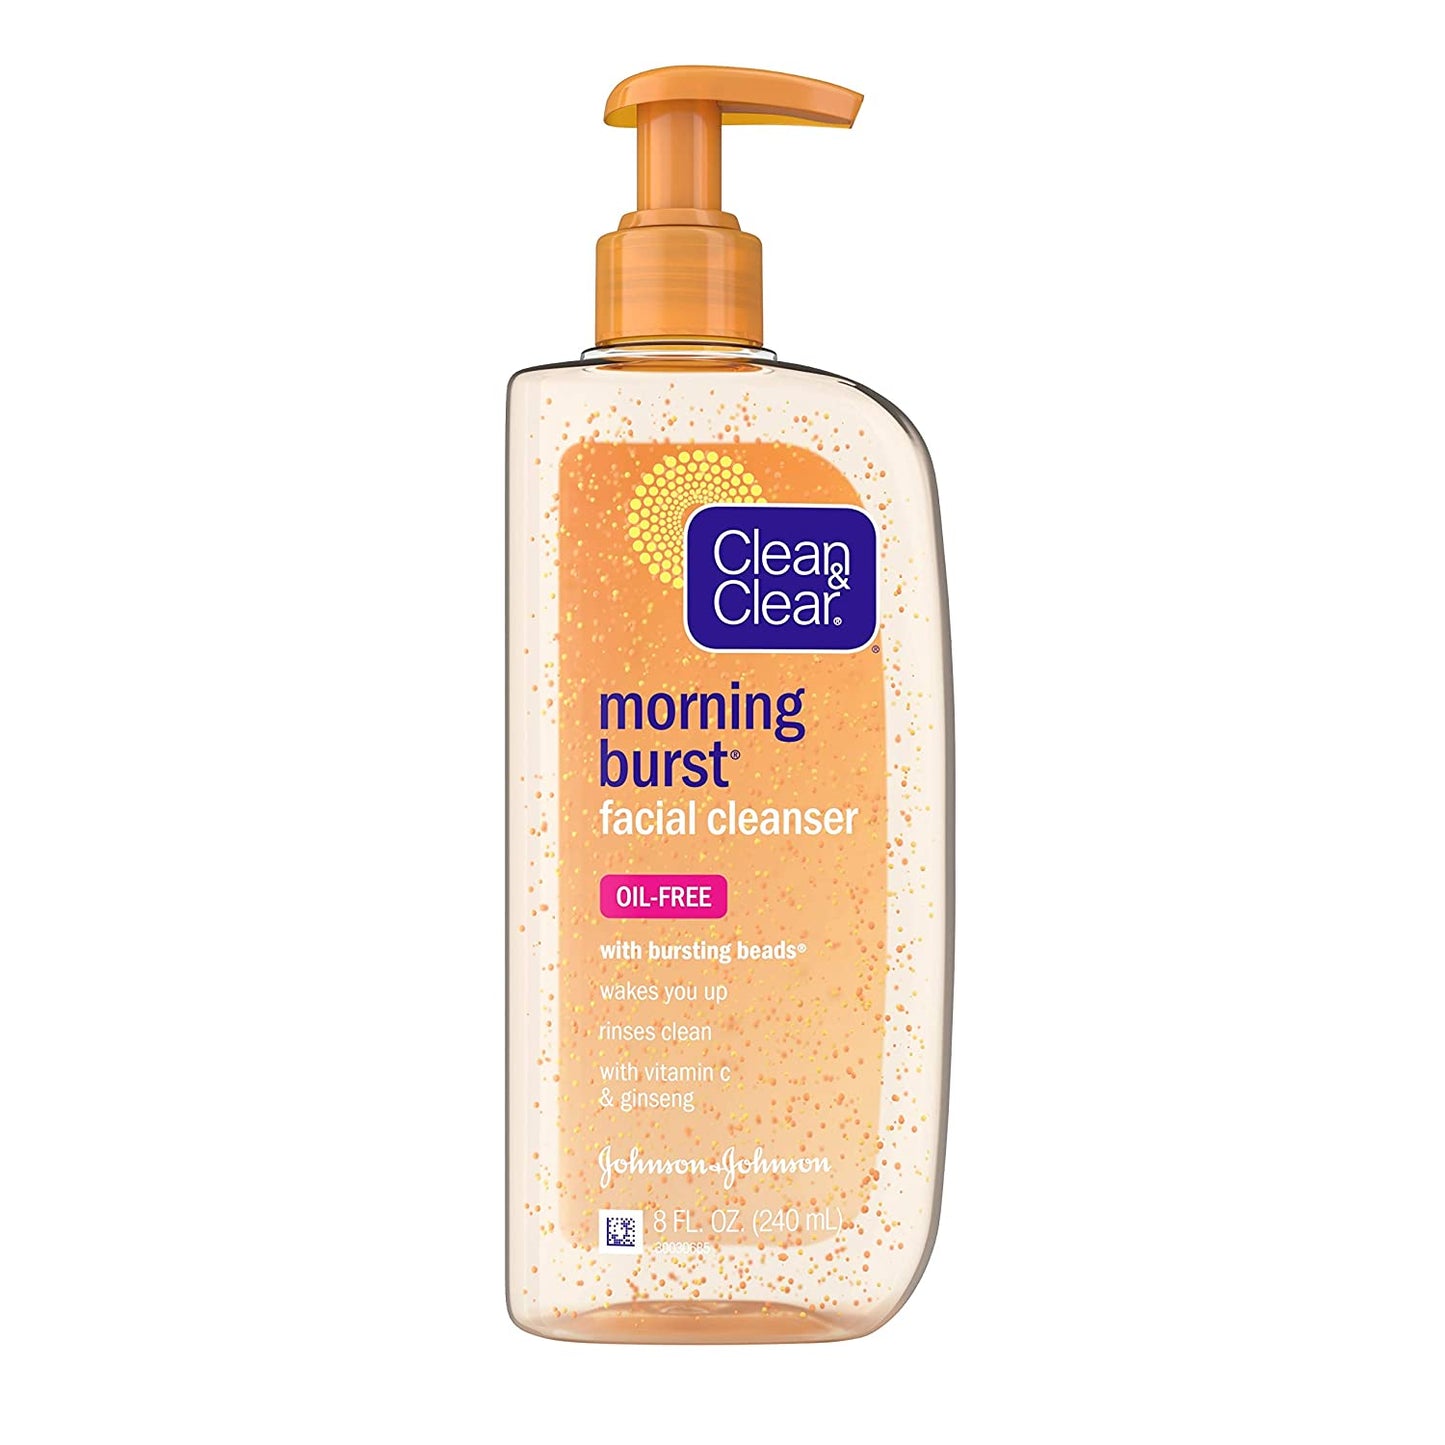 Clean & Clear Morning Burst Oil-Free Facial Cleanser Daily Brightening Face Wash - 8oz/24pk